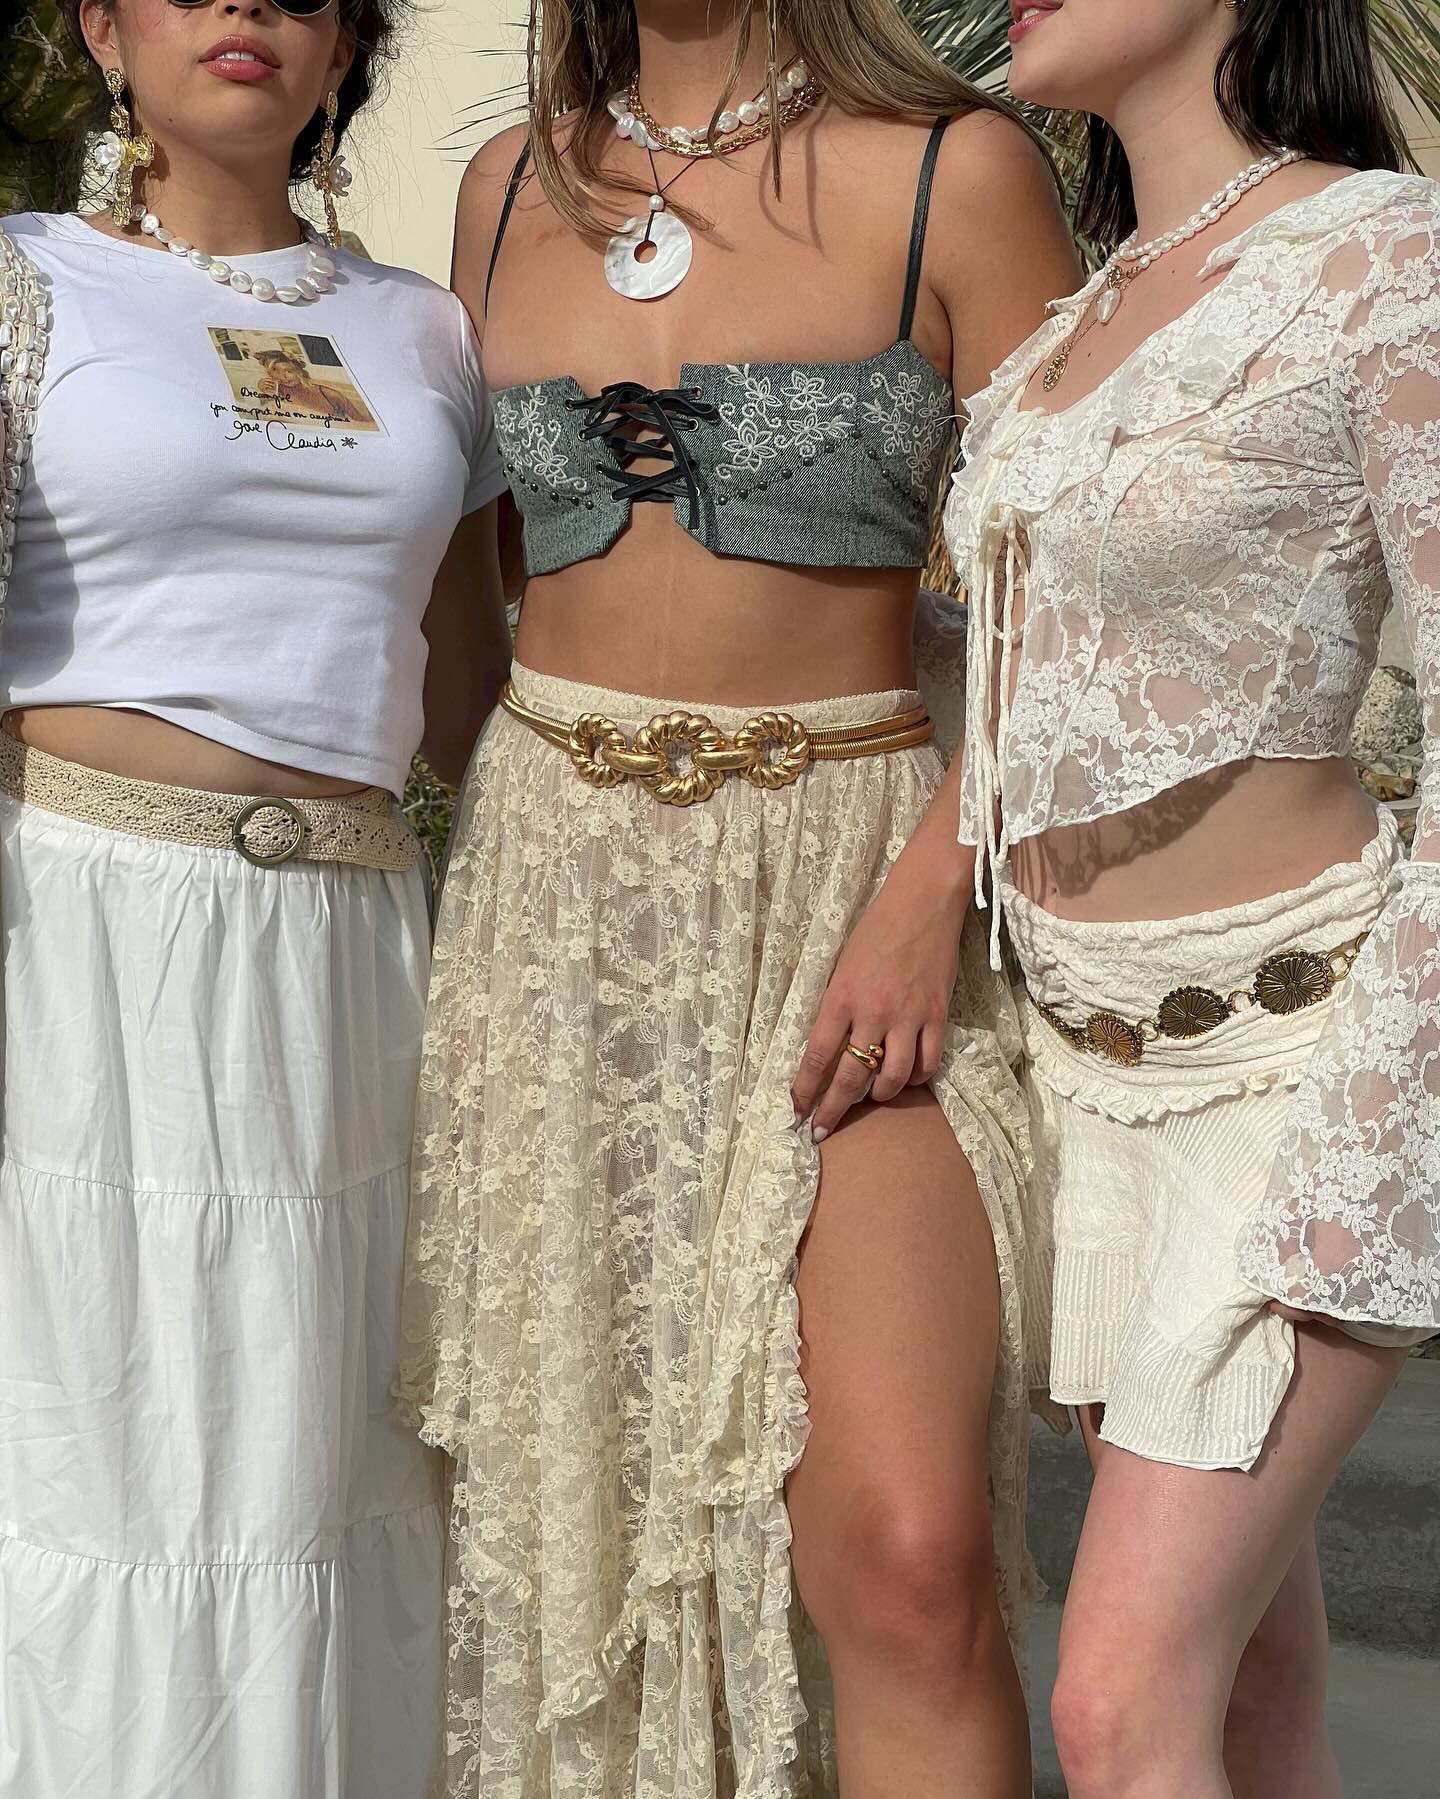 Three women at Coachella wearing white and cream outfits.